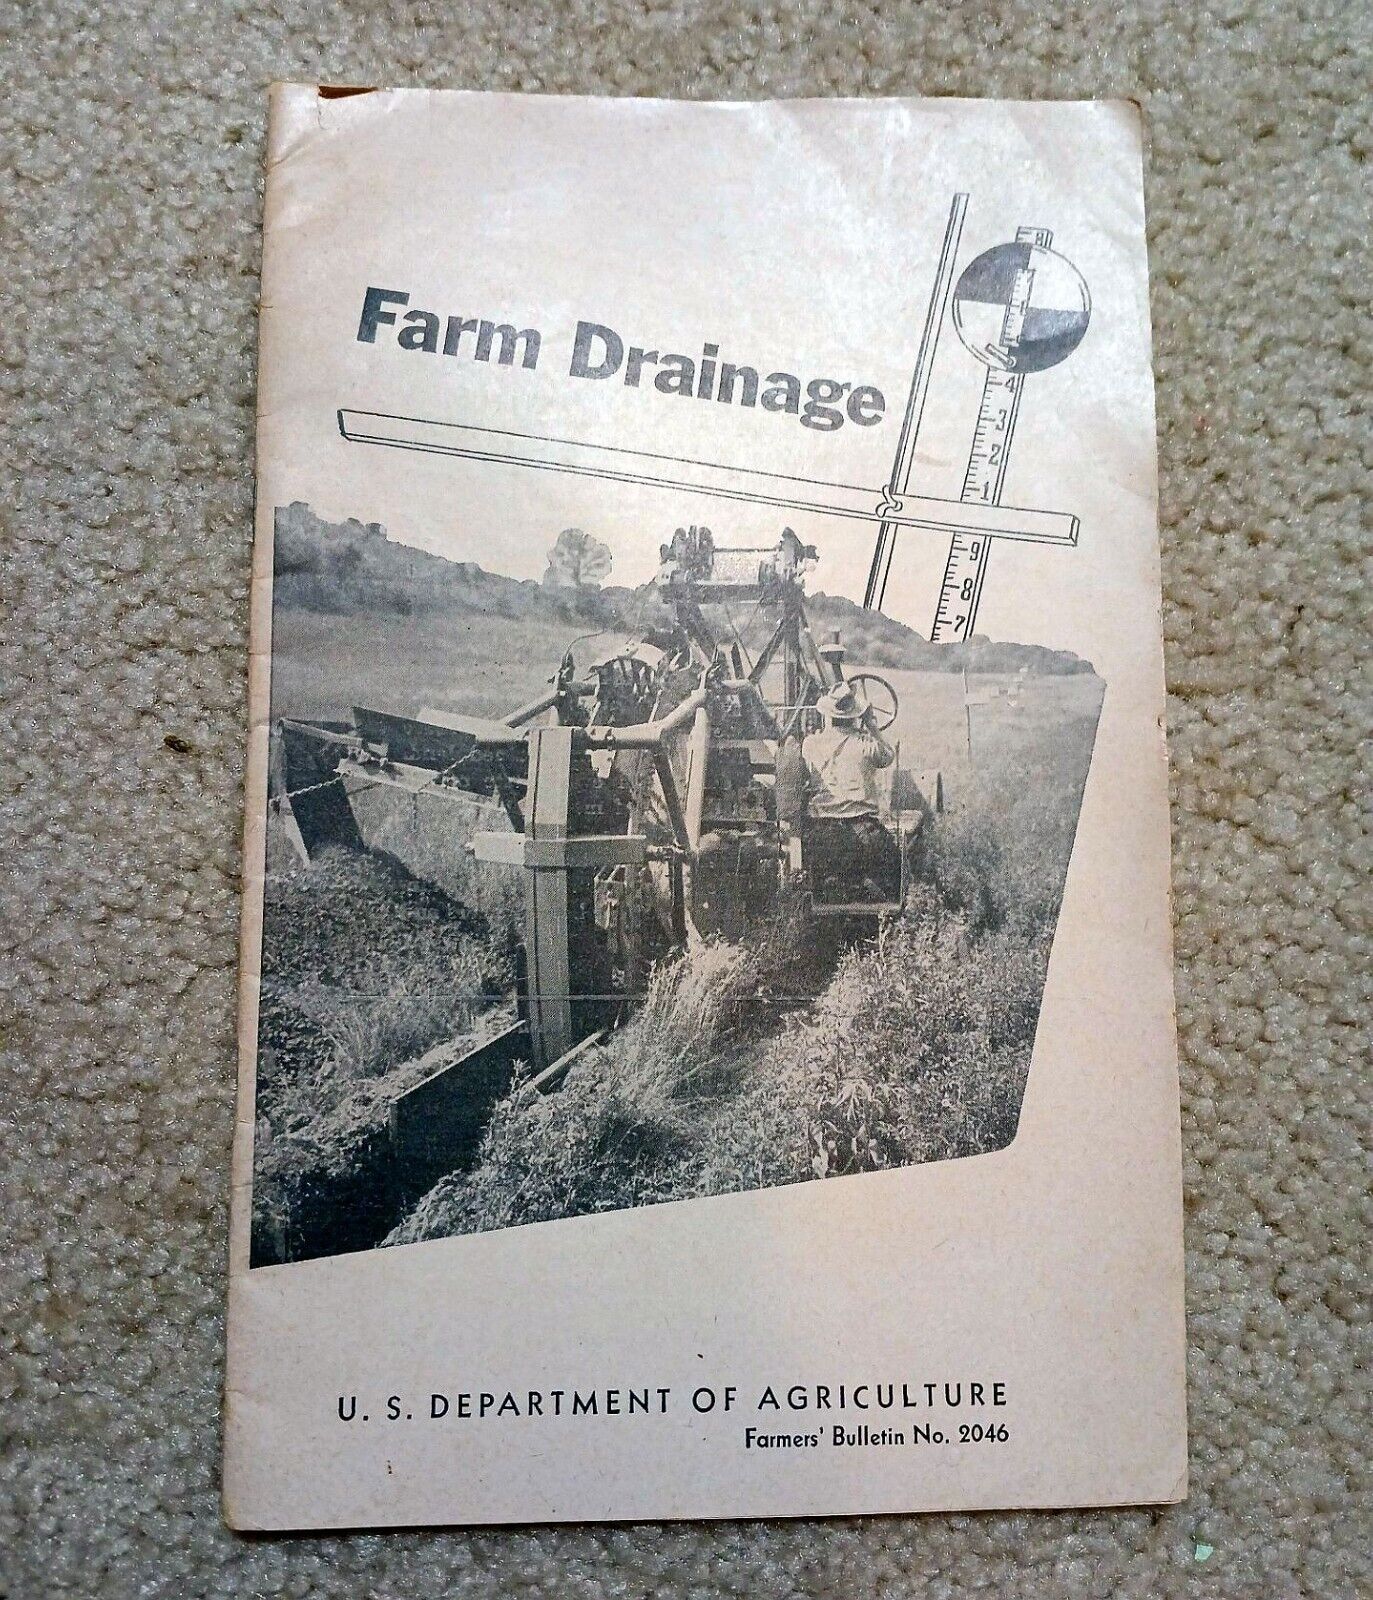 1952 Farm Drainage Manual from US Dept. of Agriculture